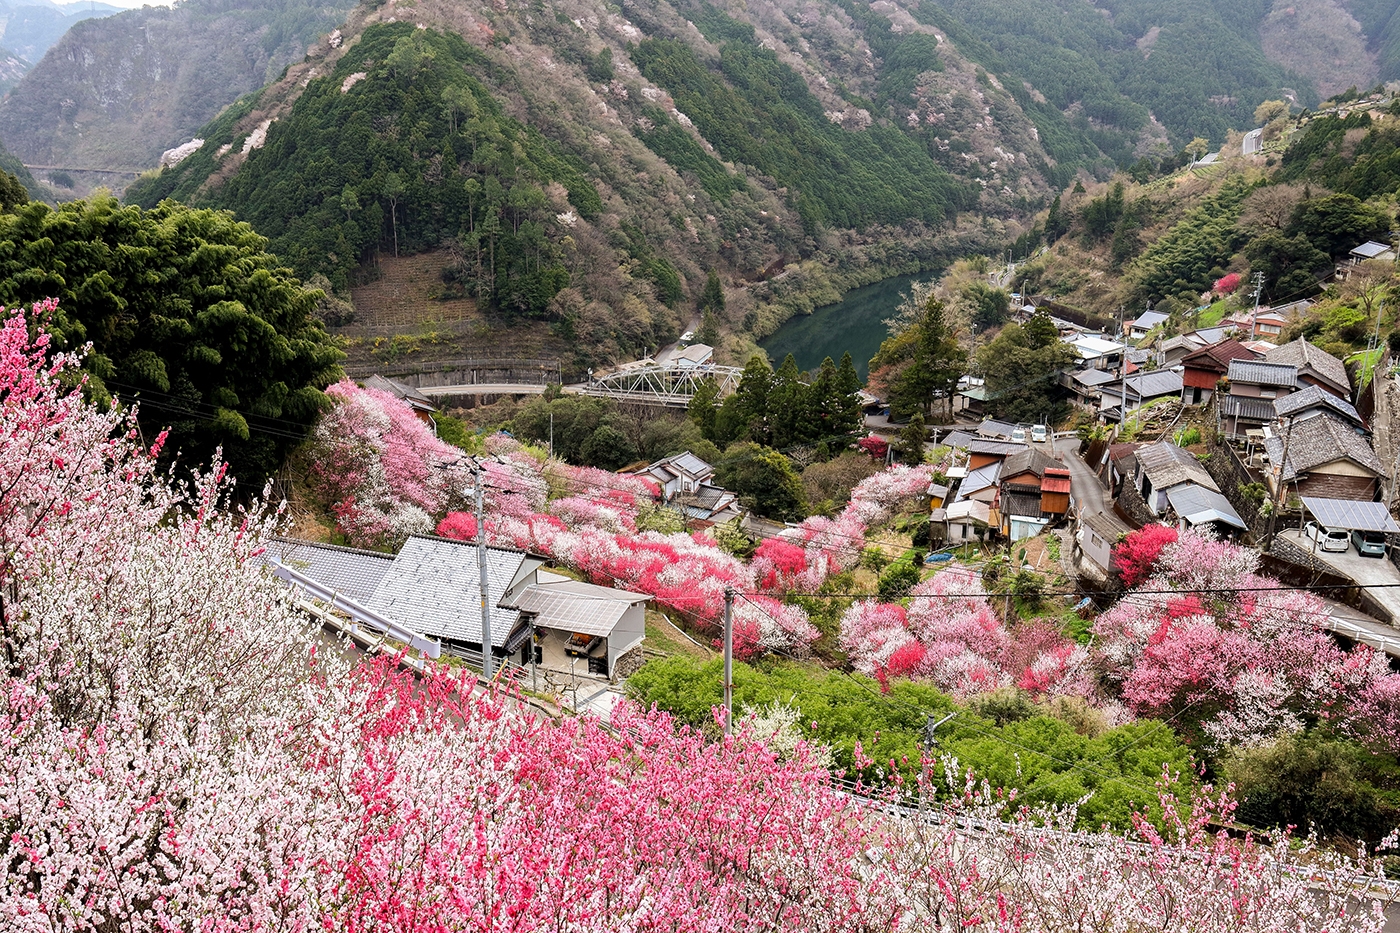 Niyodogawa Town's Teramura District in Kochi Prefecture bursts with spring colour, showcasing nature's vibrant palette in a picturesque display